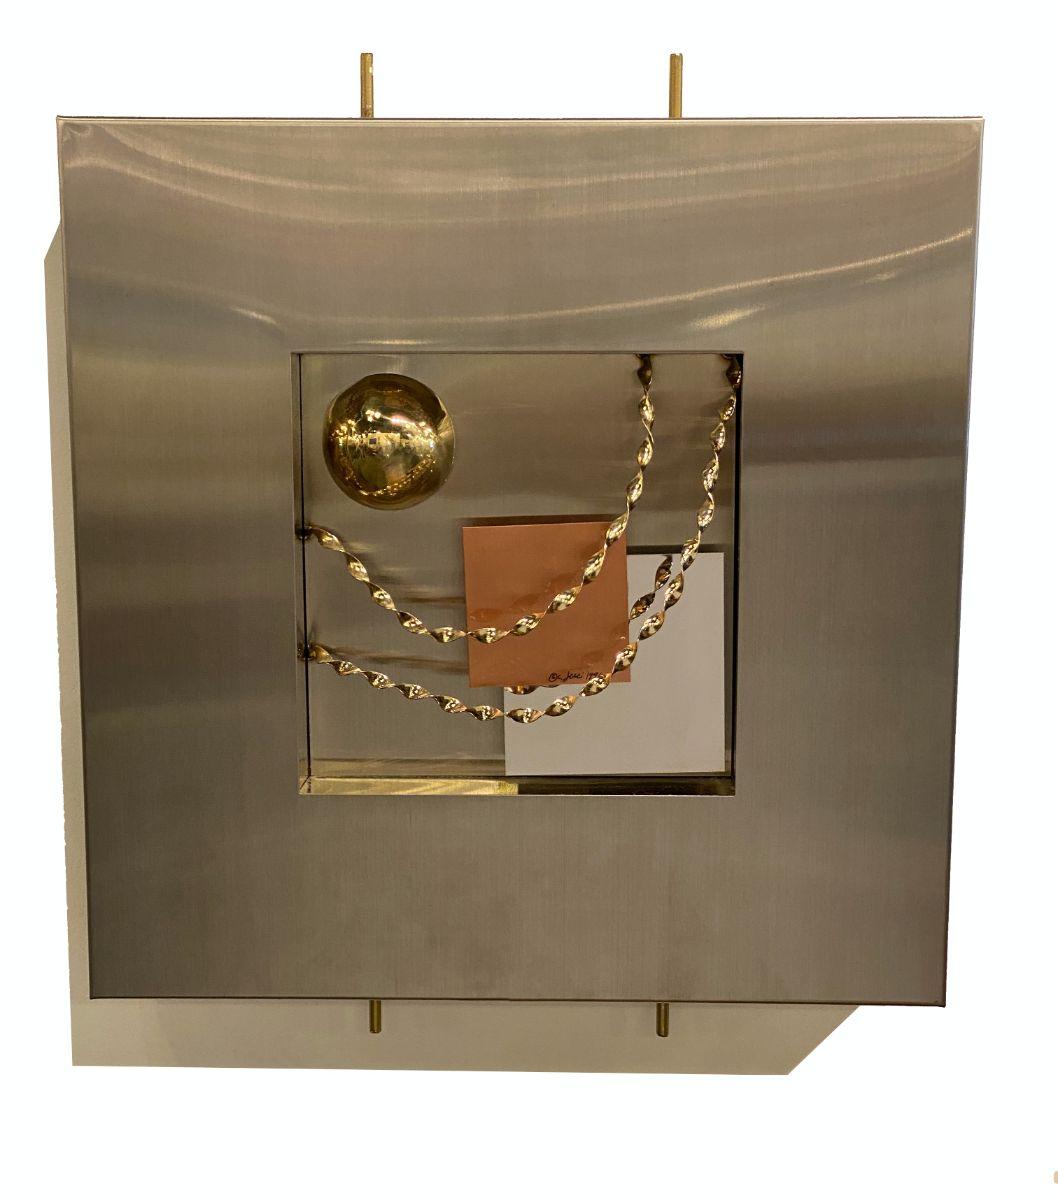 Set 4 American Modern Stainless Steel, Brass & Copper Wall Sculptures, Curtis Jere In Good Condition For Sale In Hollywood, FL